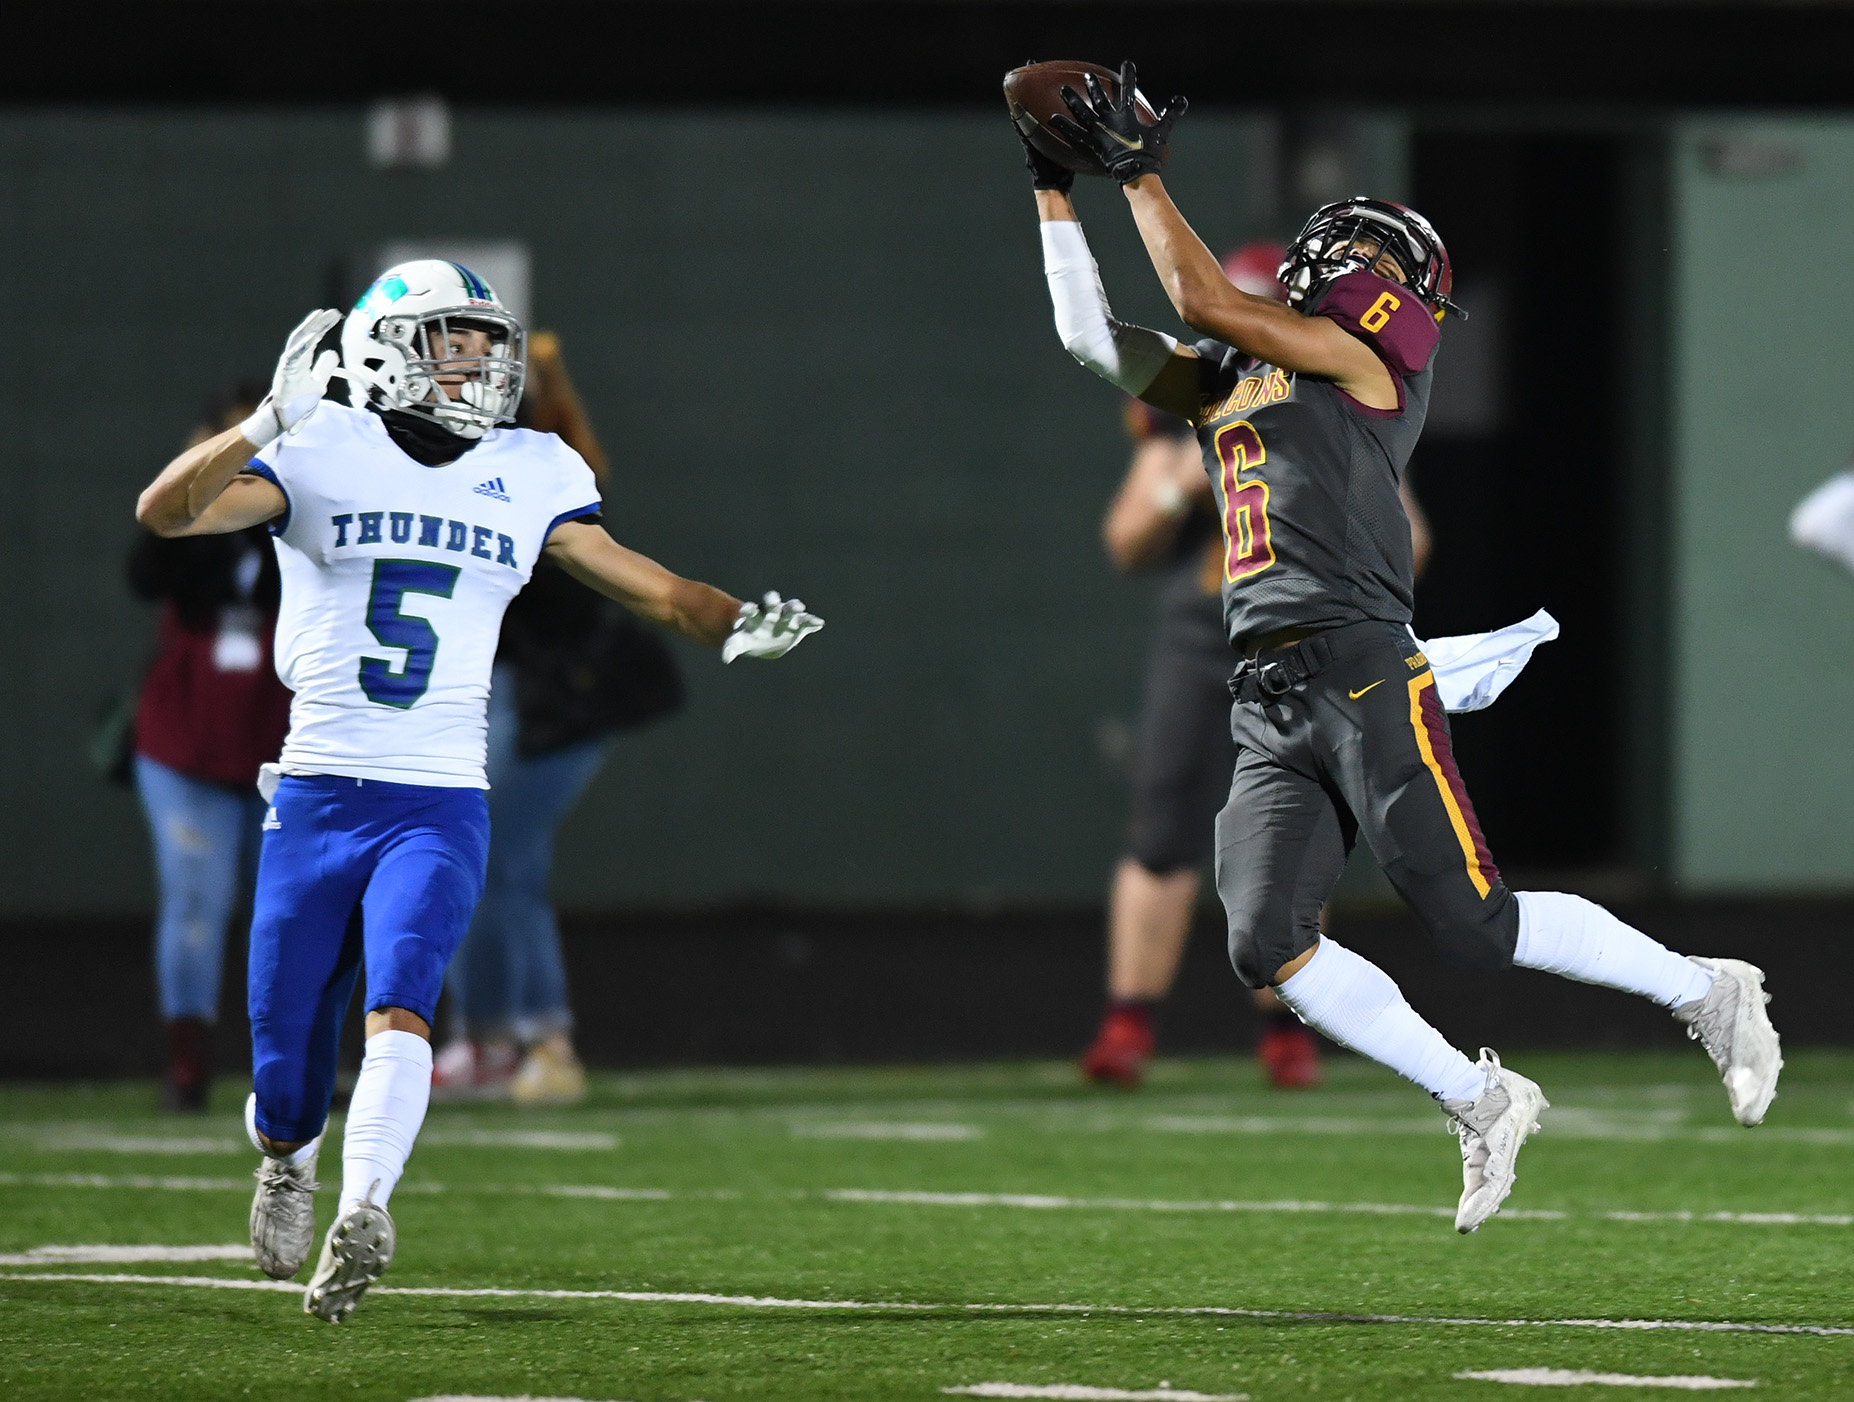 Prairie junior Nathan Phingphouvagh, right, makes a leaping catch under pressure from Mountain View sophomore Jacob Martin on Friday, Oct. 15, 2021, during the Falcons’  17-14 loss to Mountain View at Battle Ground High School.